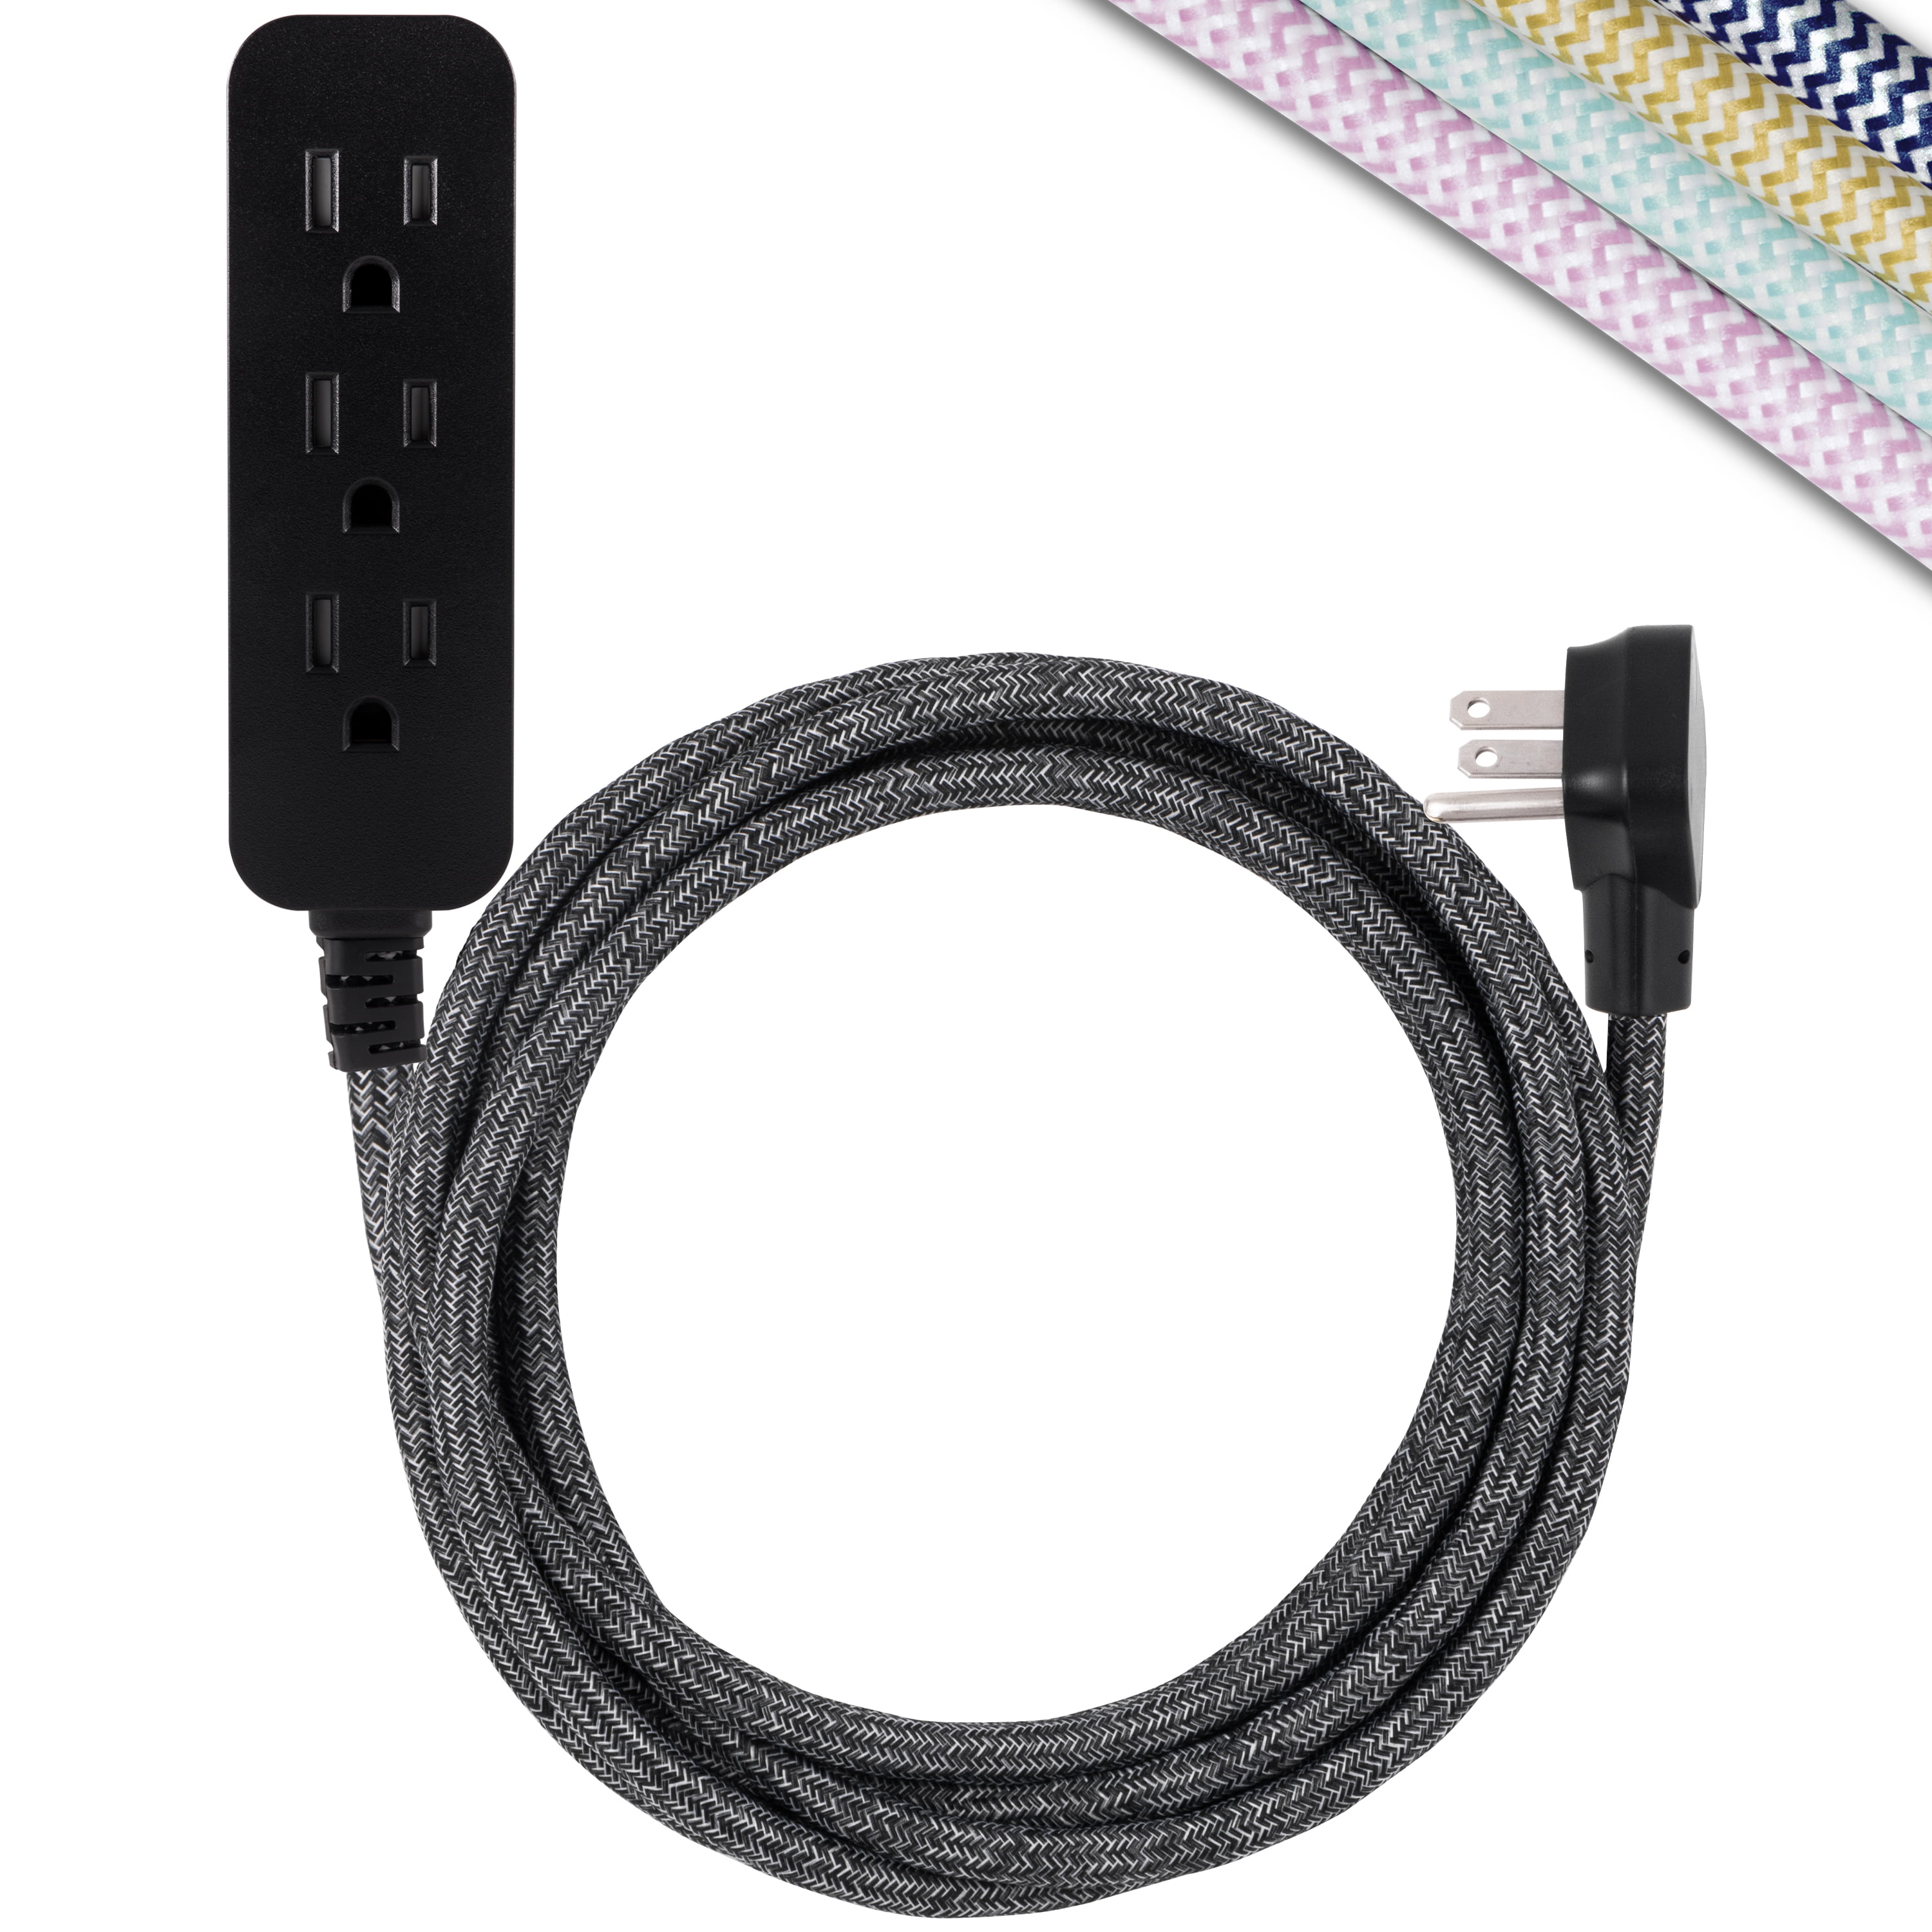 Cordinate Designer Extension Cord 3 Outlet 10 Foot Cord Black 42024 Walmart Com Walmart Com,Smart Design Pop Up Organizer